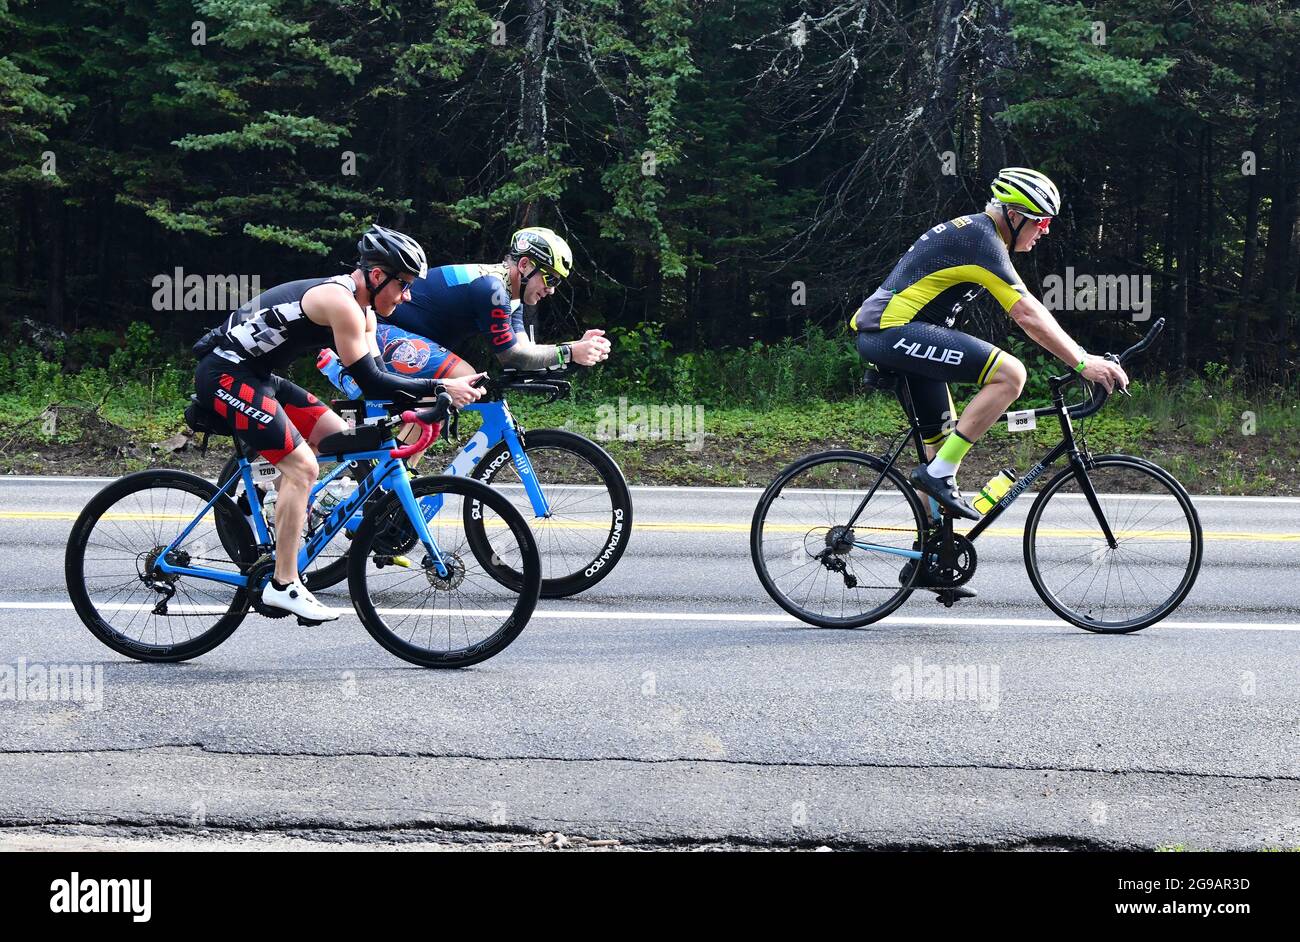 Ironman race participants engage in the grueling cycling portion of the long endurance triathlon race up and down the mountainous roads Stock Photo